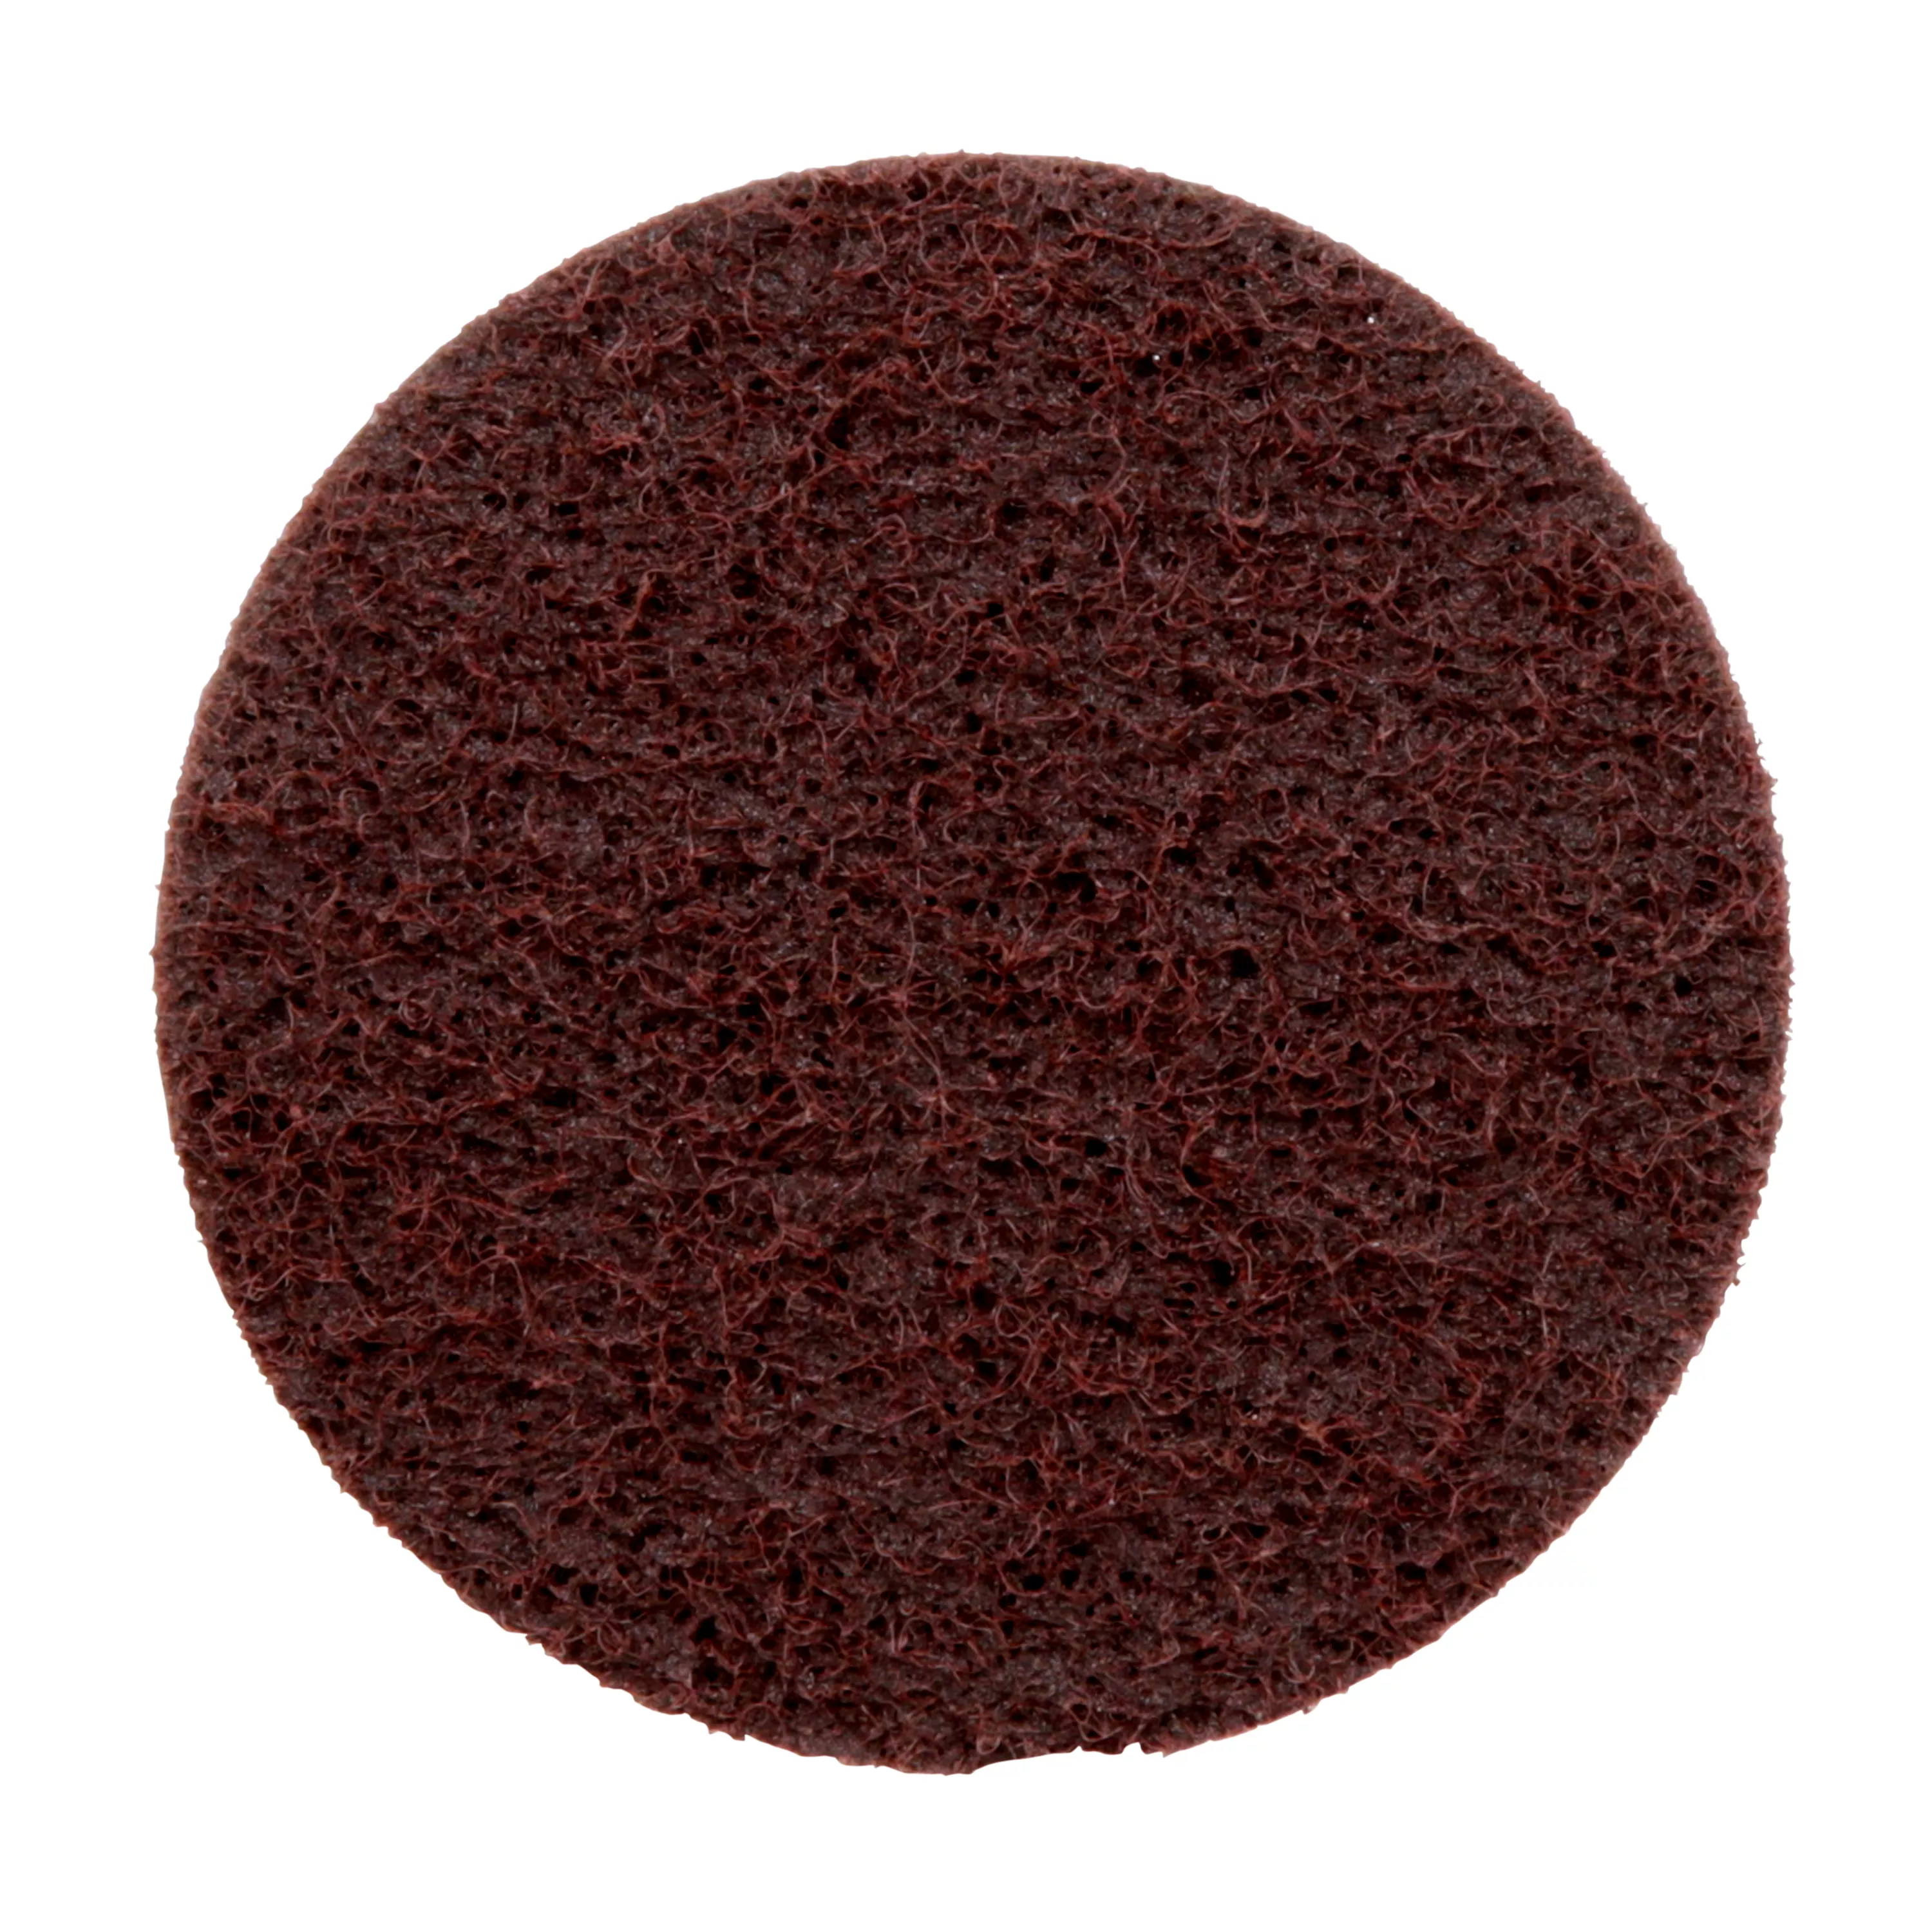 Standard Abrasives™ Quick Change Surface Conditioning RC Disc, 840485,
A/O MED, TR, Maroon, 3 in, Die Q300V, 25/Car, 250 ea/Case